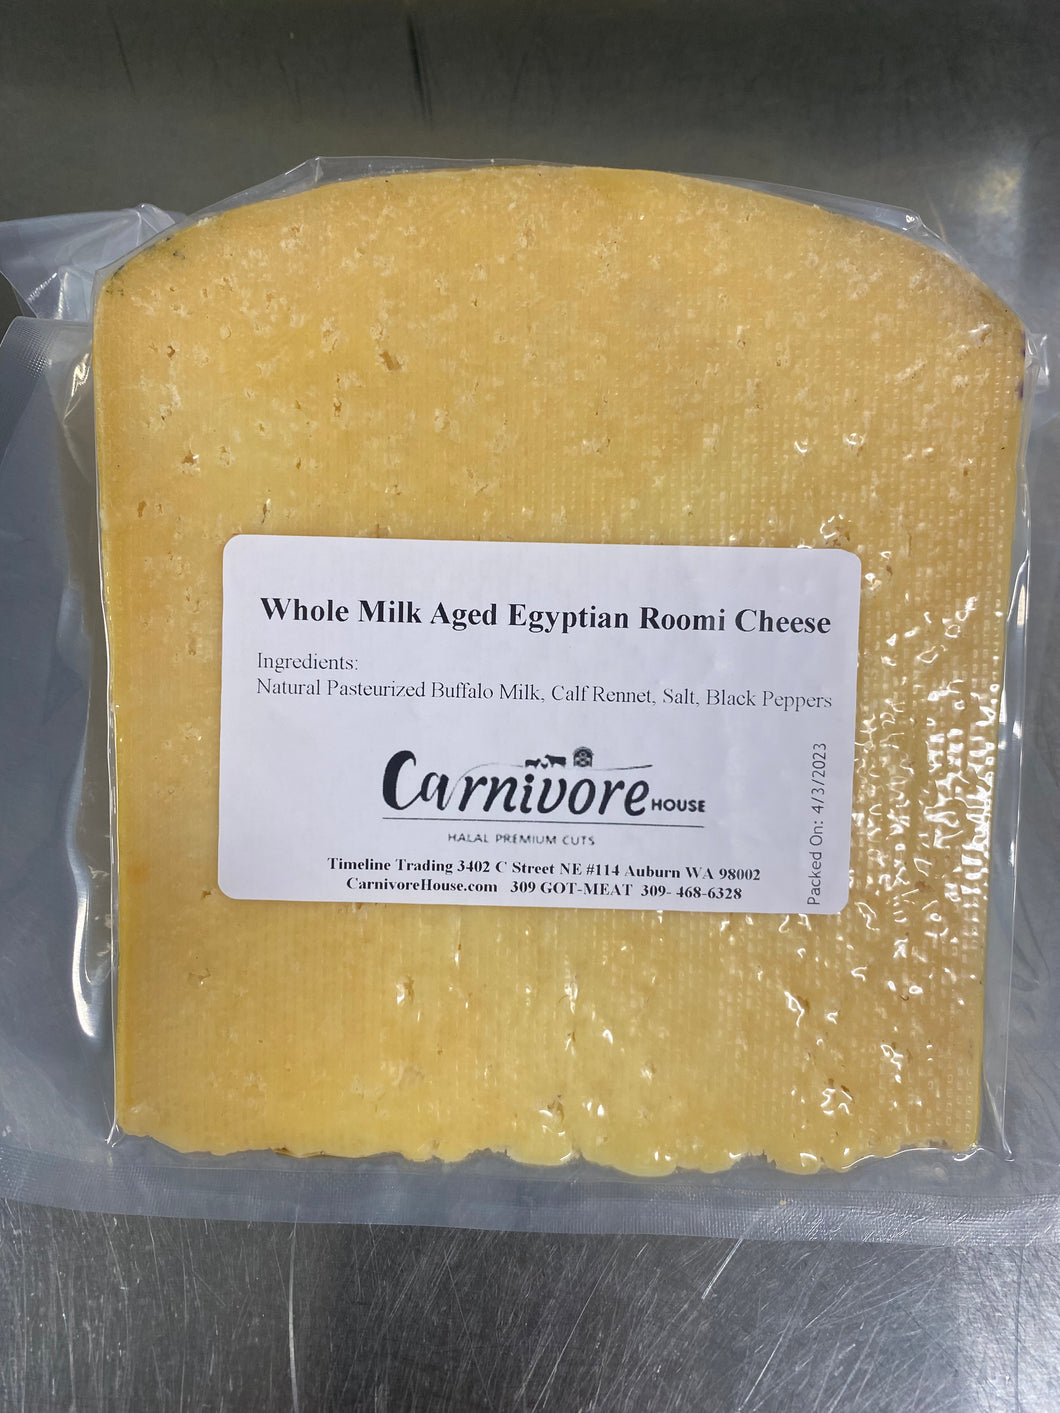 Aged Egyptian Roomi Cheese